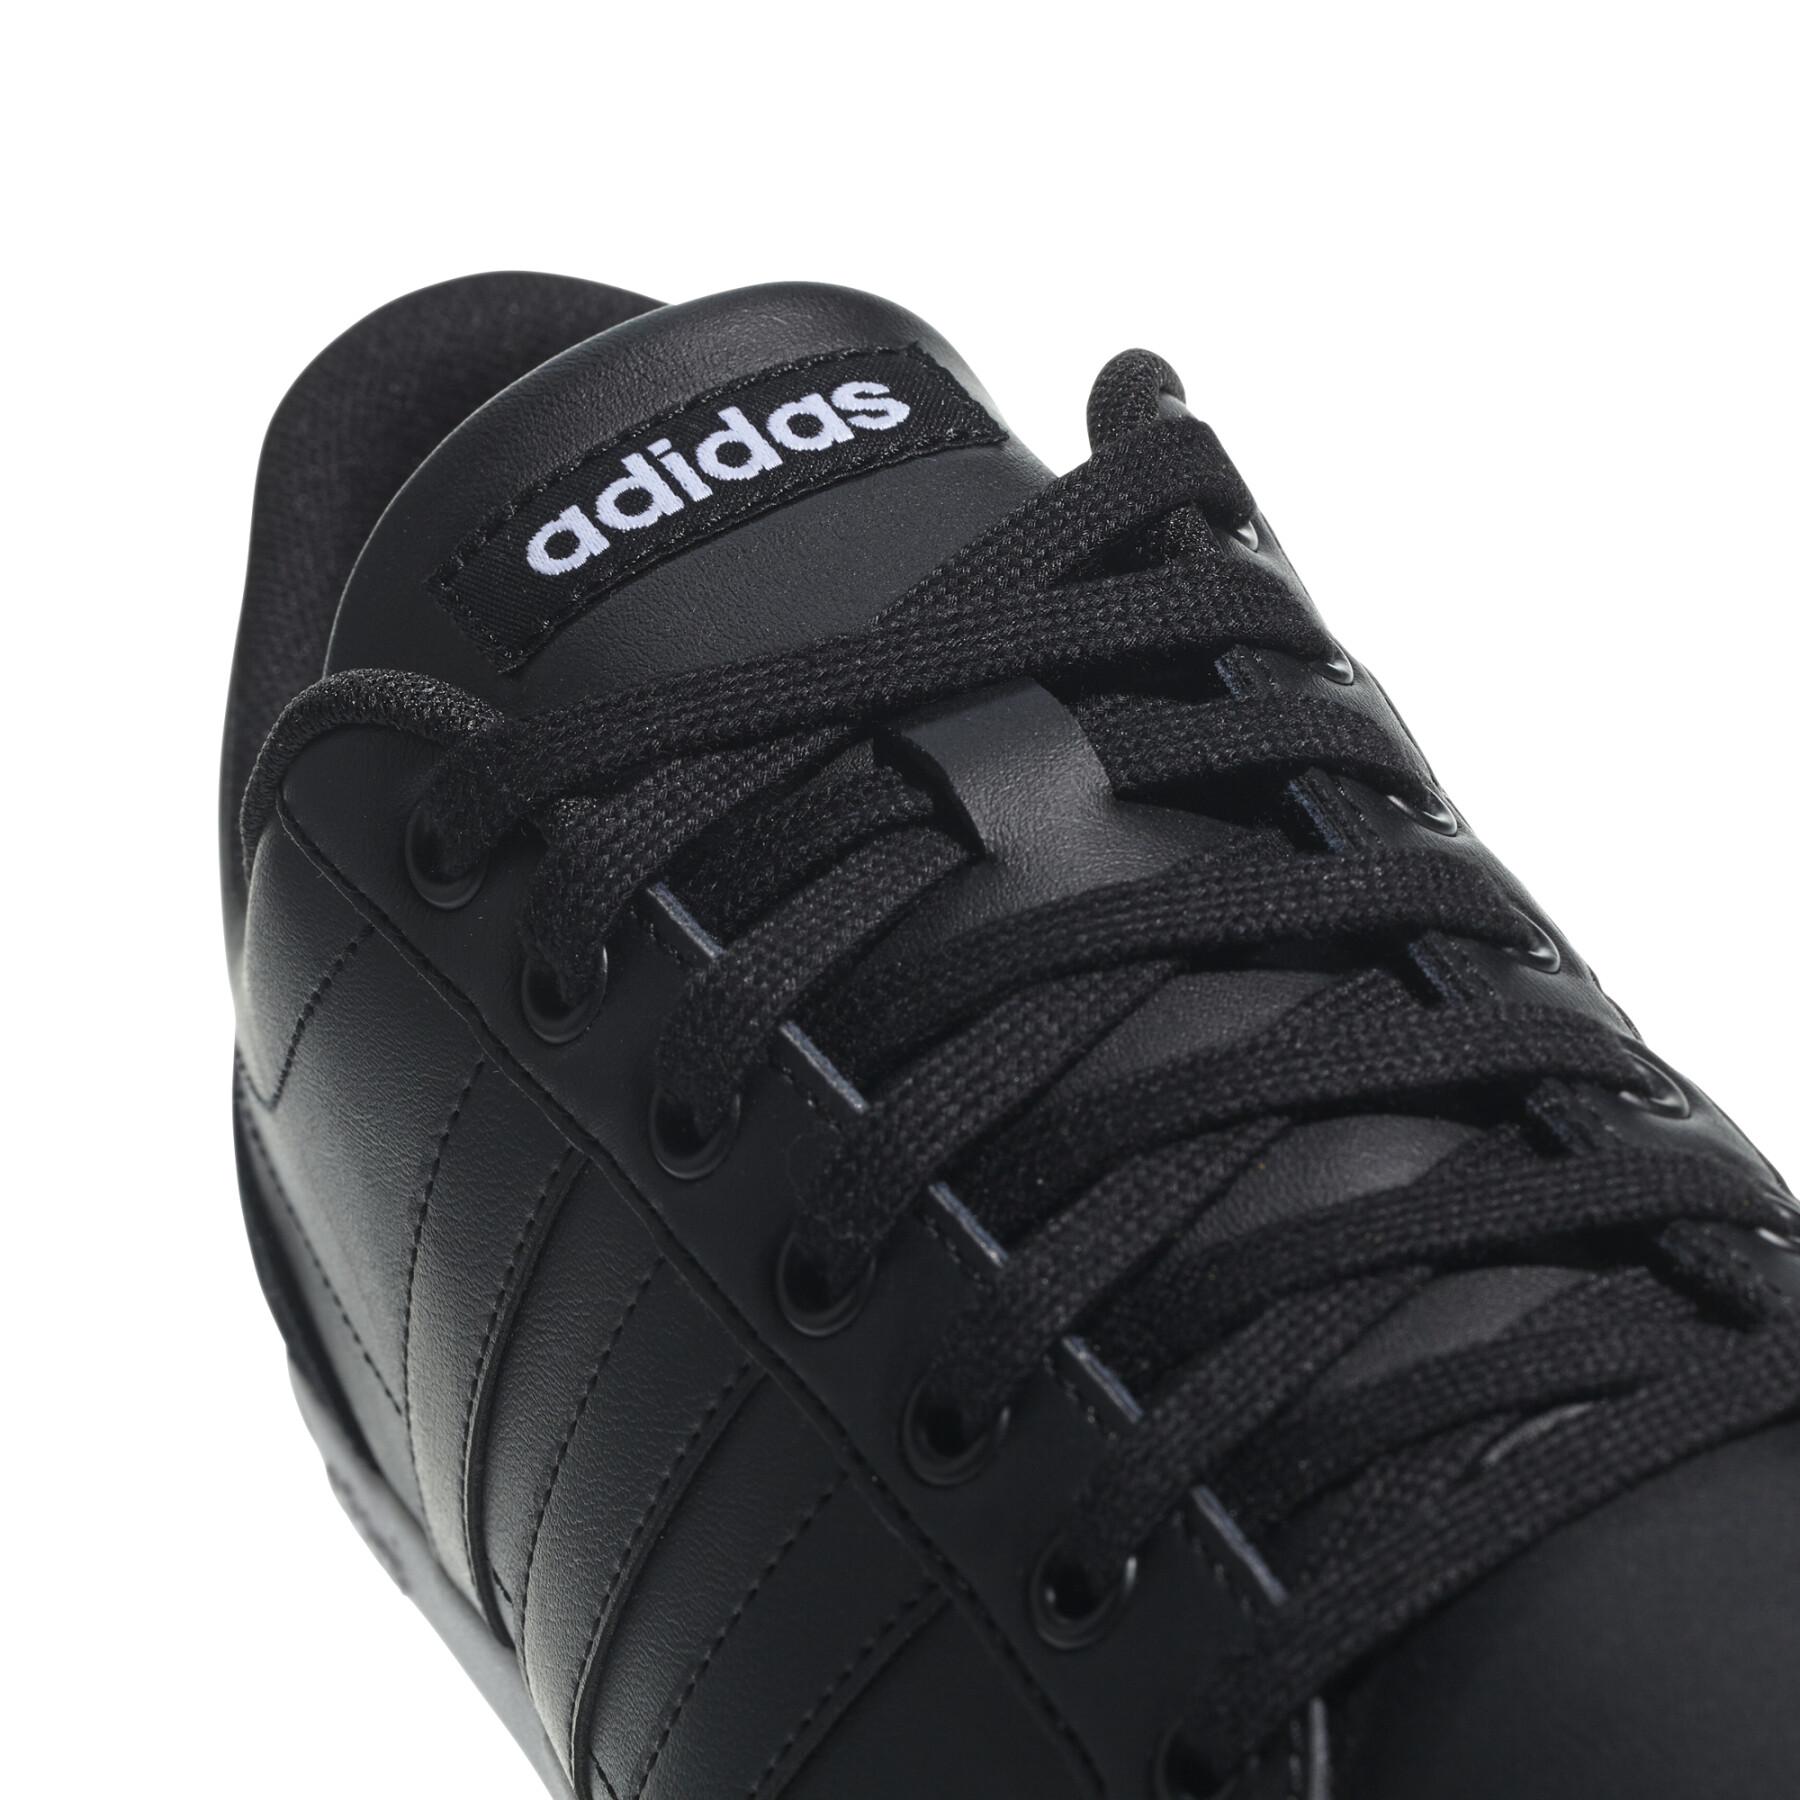 Sneakers adidas Caflaire